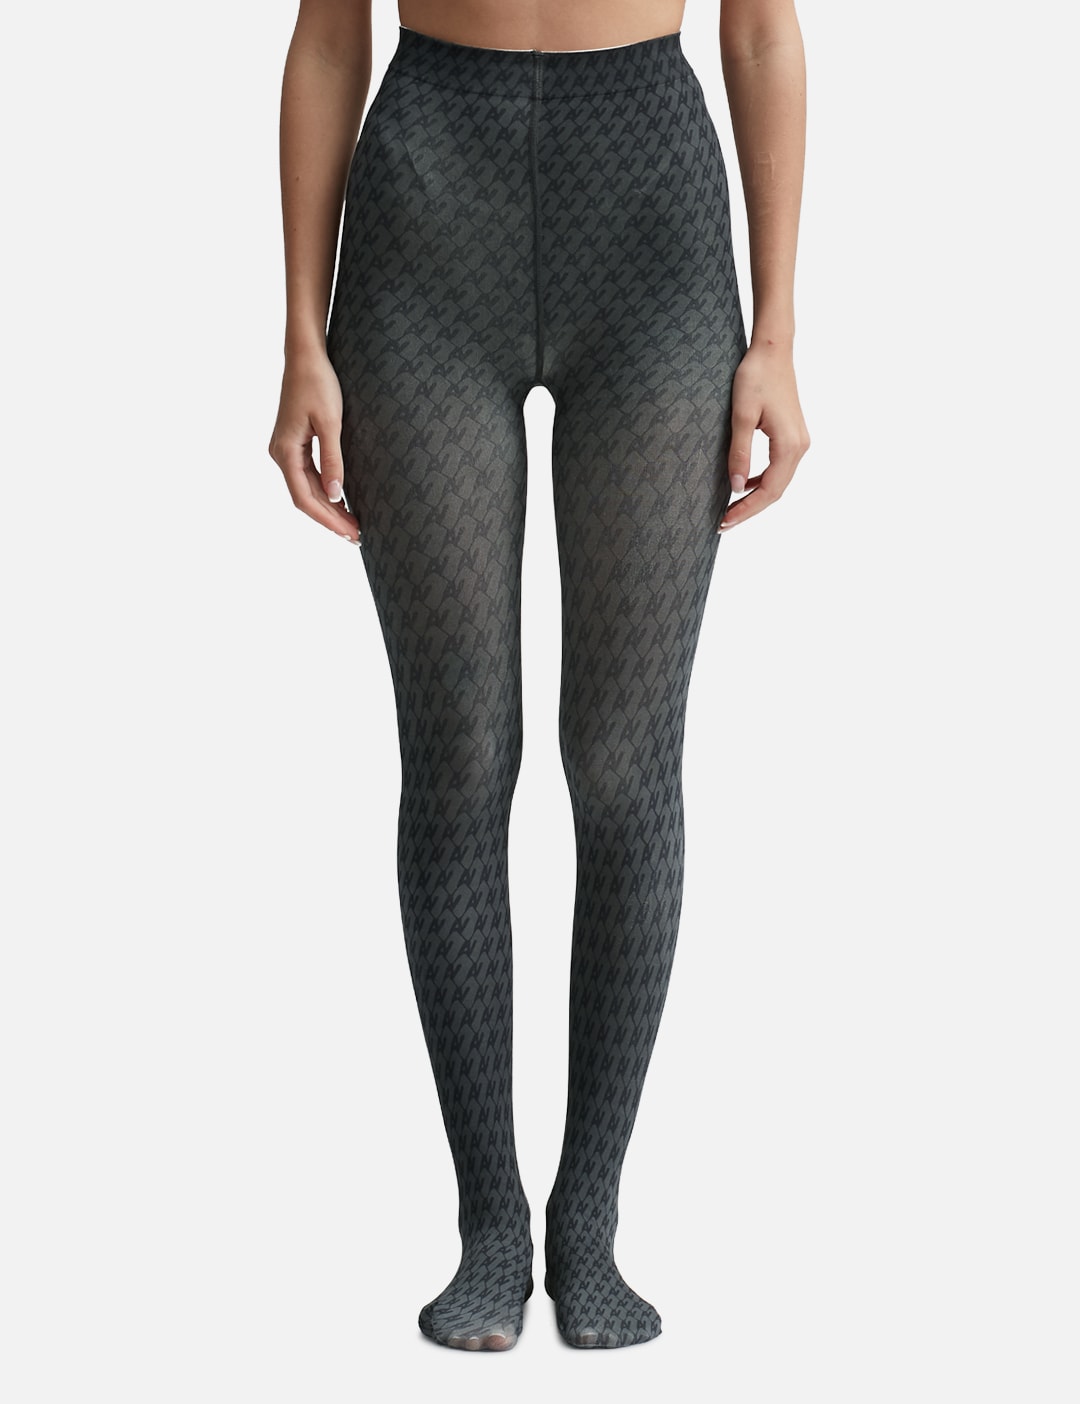 Burberry - Check Panel Leggings  HBX - Globally Curated Fashion